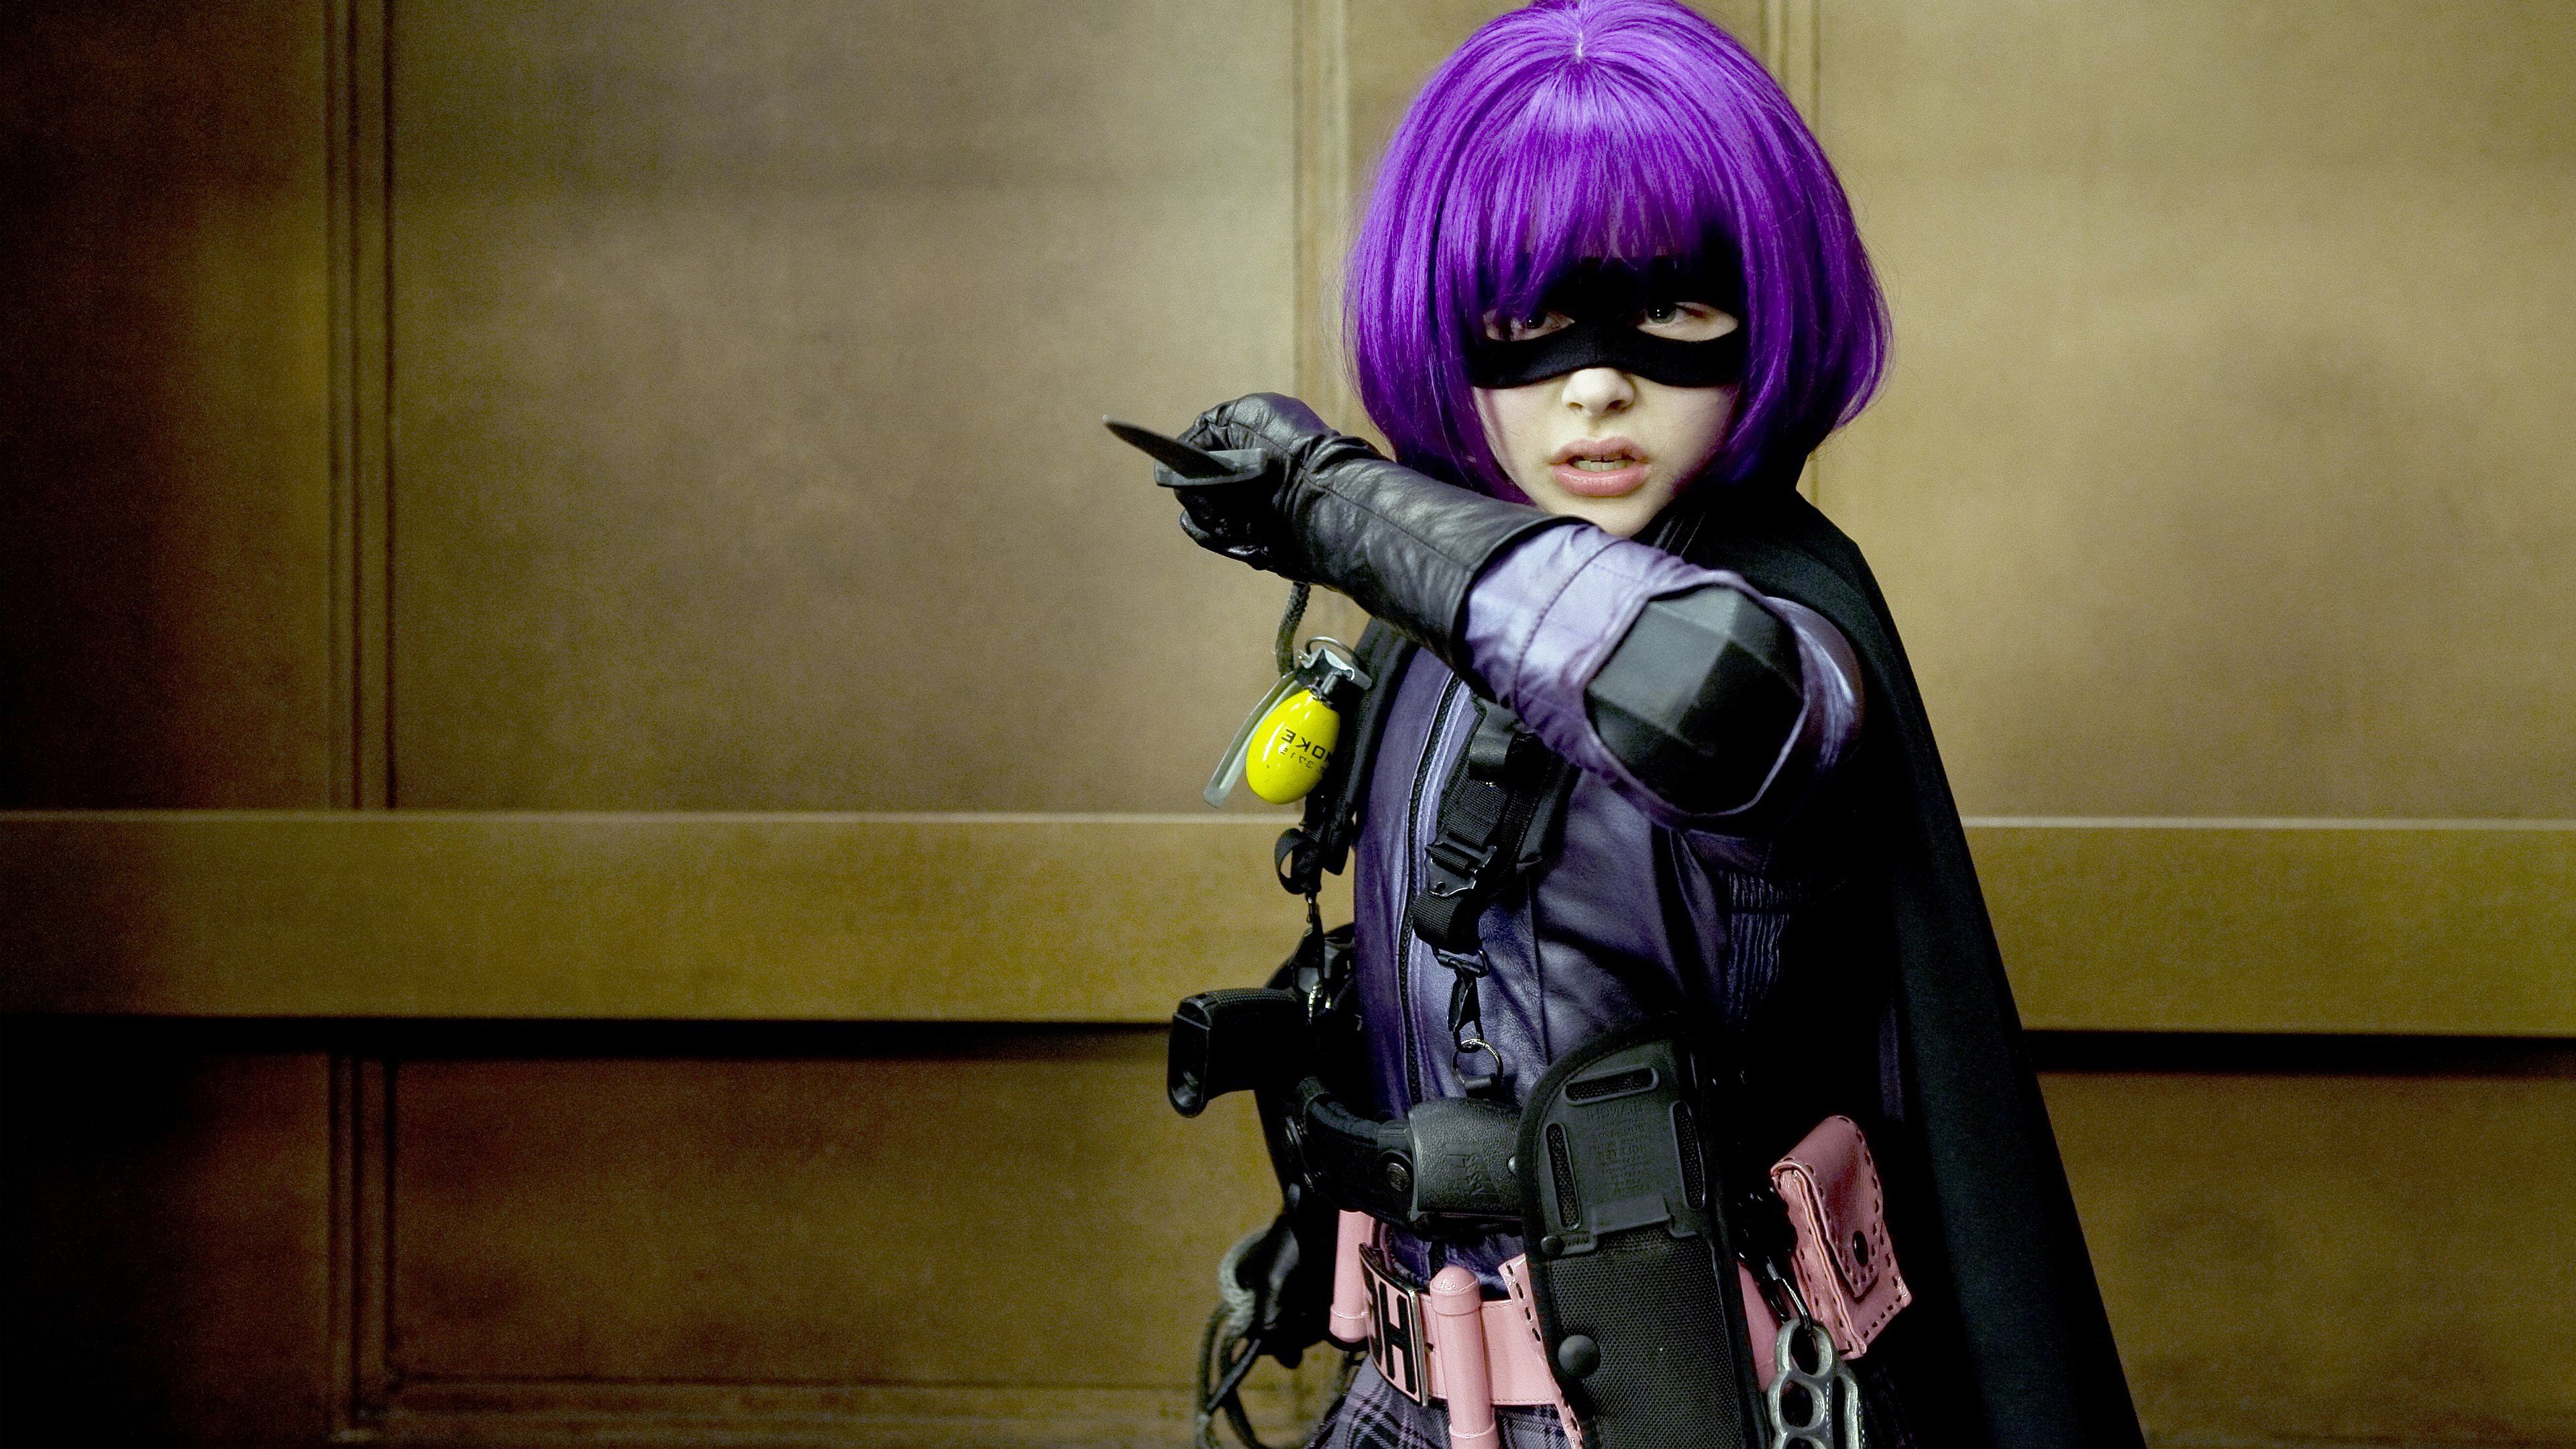 Kick Ass Hit Girl Hd Celebrities 4k Wallpapers Images Backgrounds Photos And Pictures